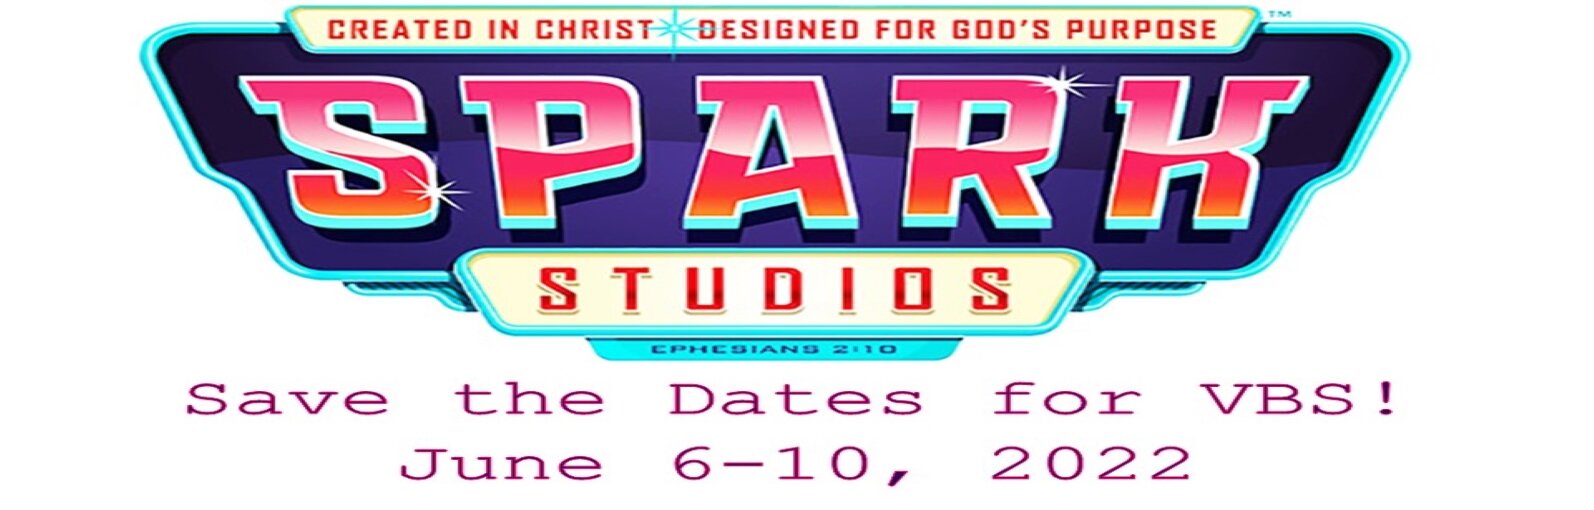 /images/r/vbs-2022-save-the-date-banner/c1594x510/vbs-2022-save-the-date-banner.jpg